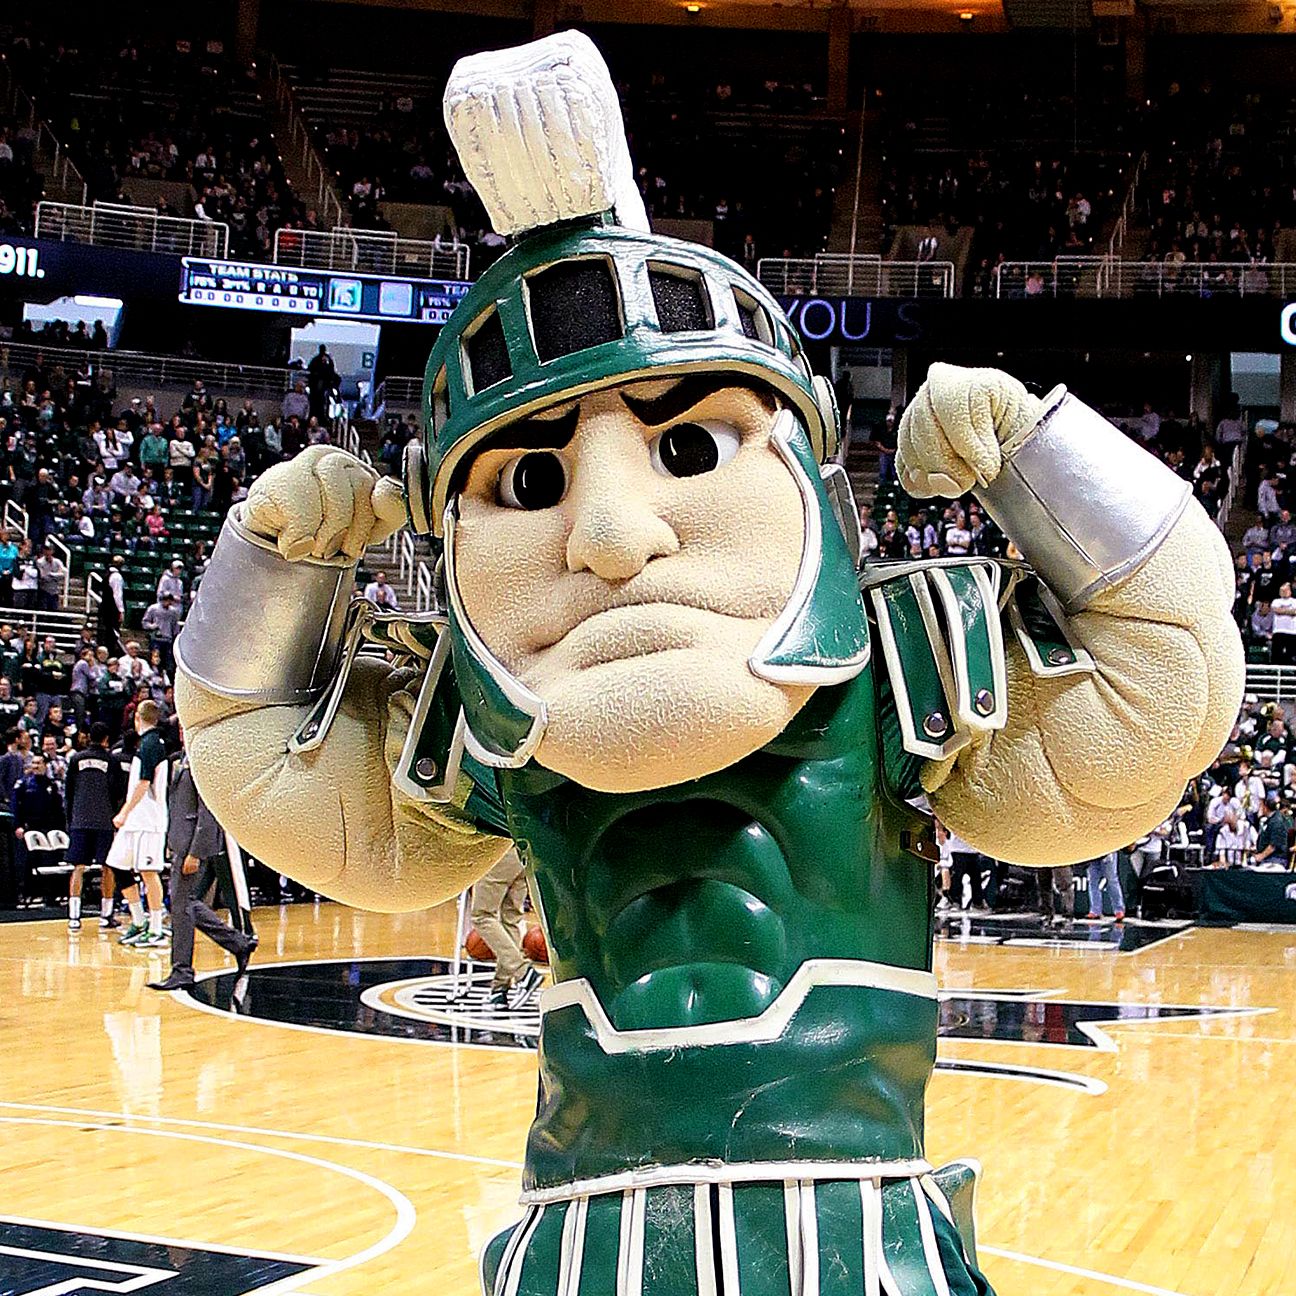 Top 10 mascots in college basketball